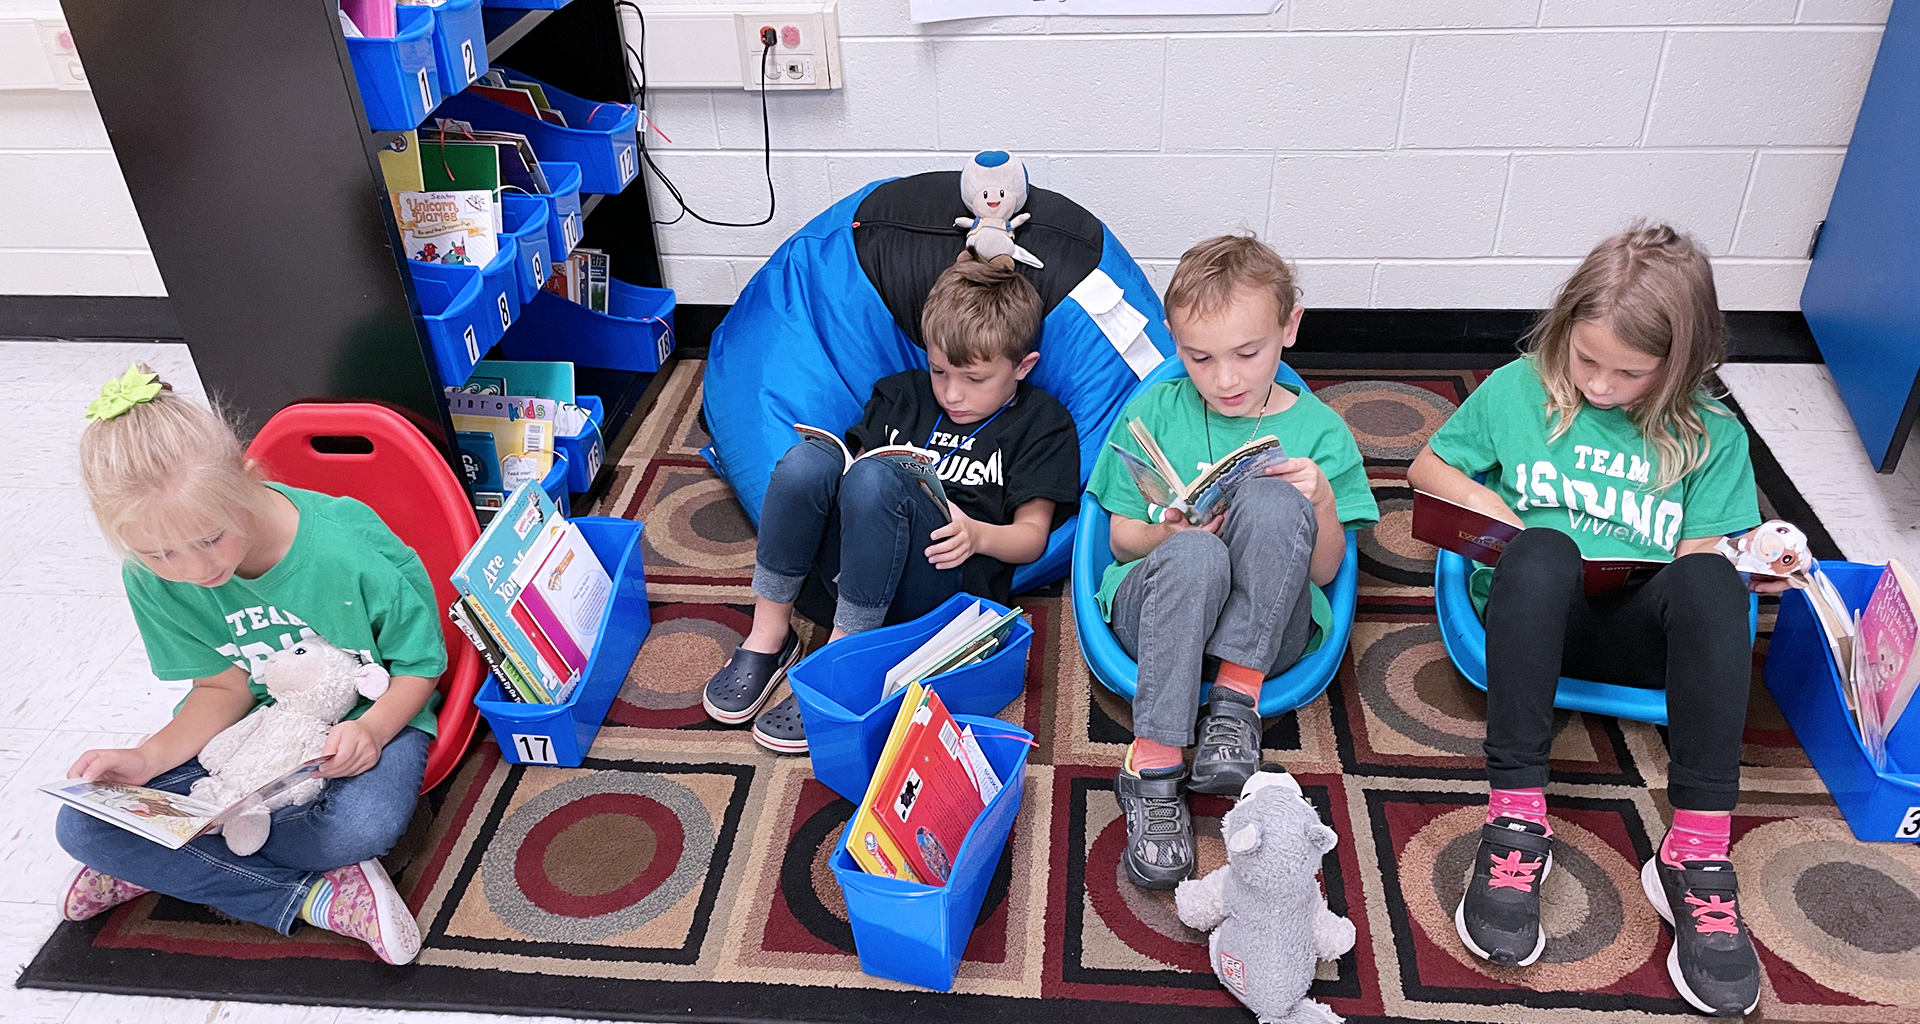 Four students sitting on the floor reading.